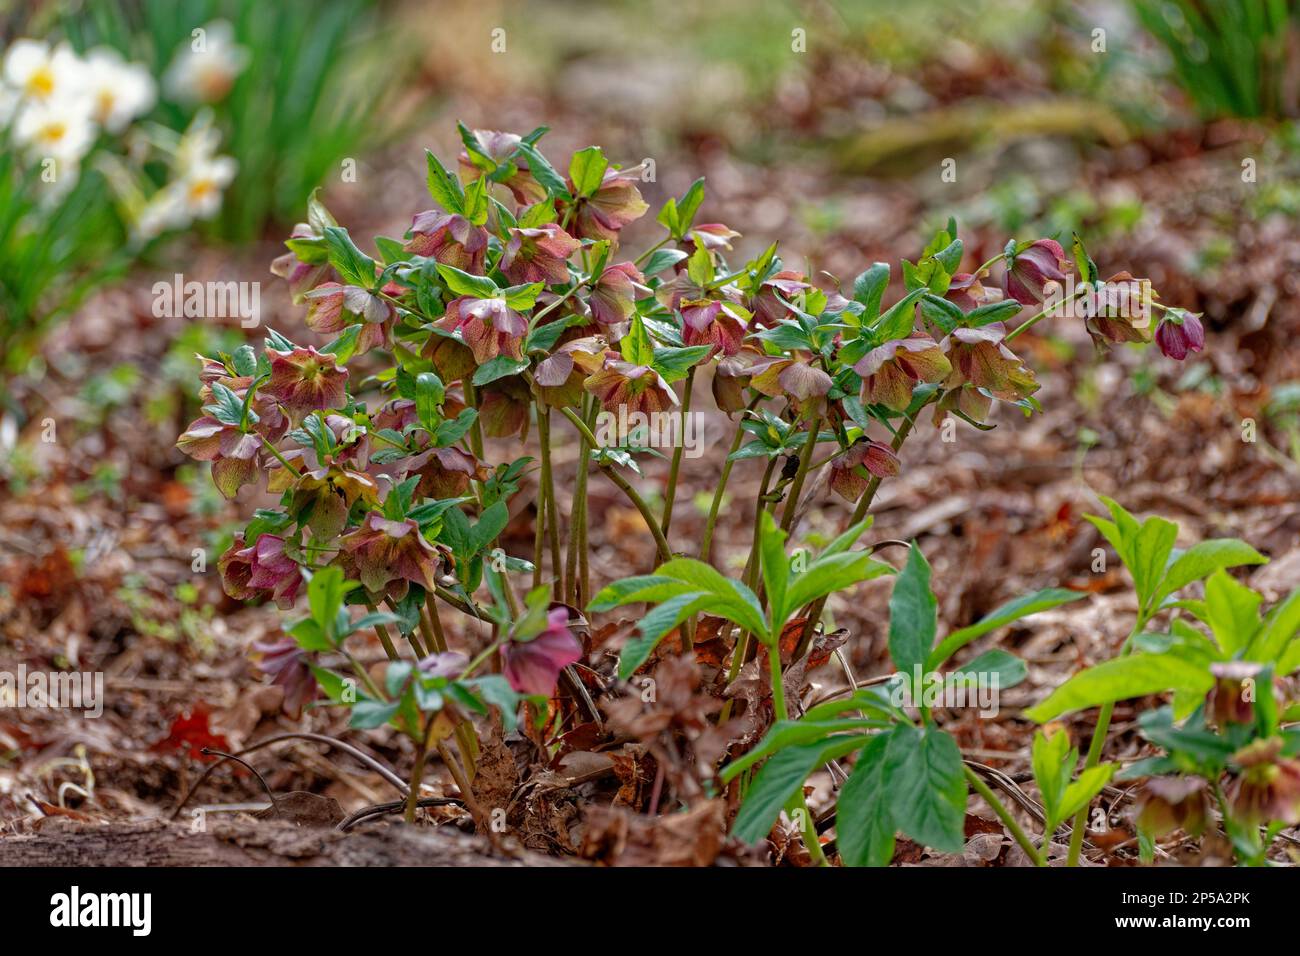 A group of pink hellebores in full bloom one of the first flowers to bloom in early springtime growing in a forest with other plants closeup view Stock Photo